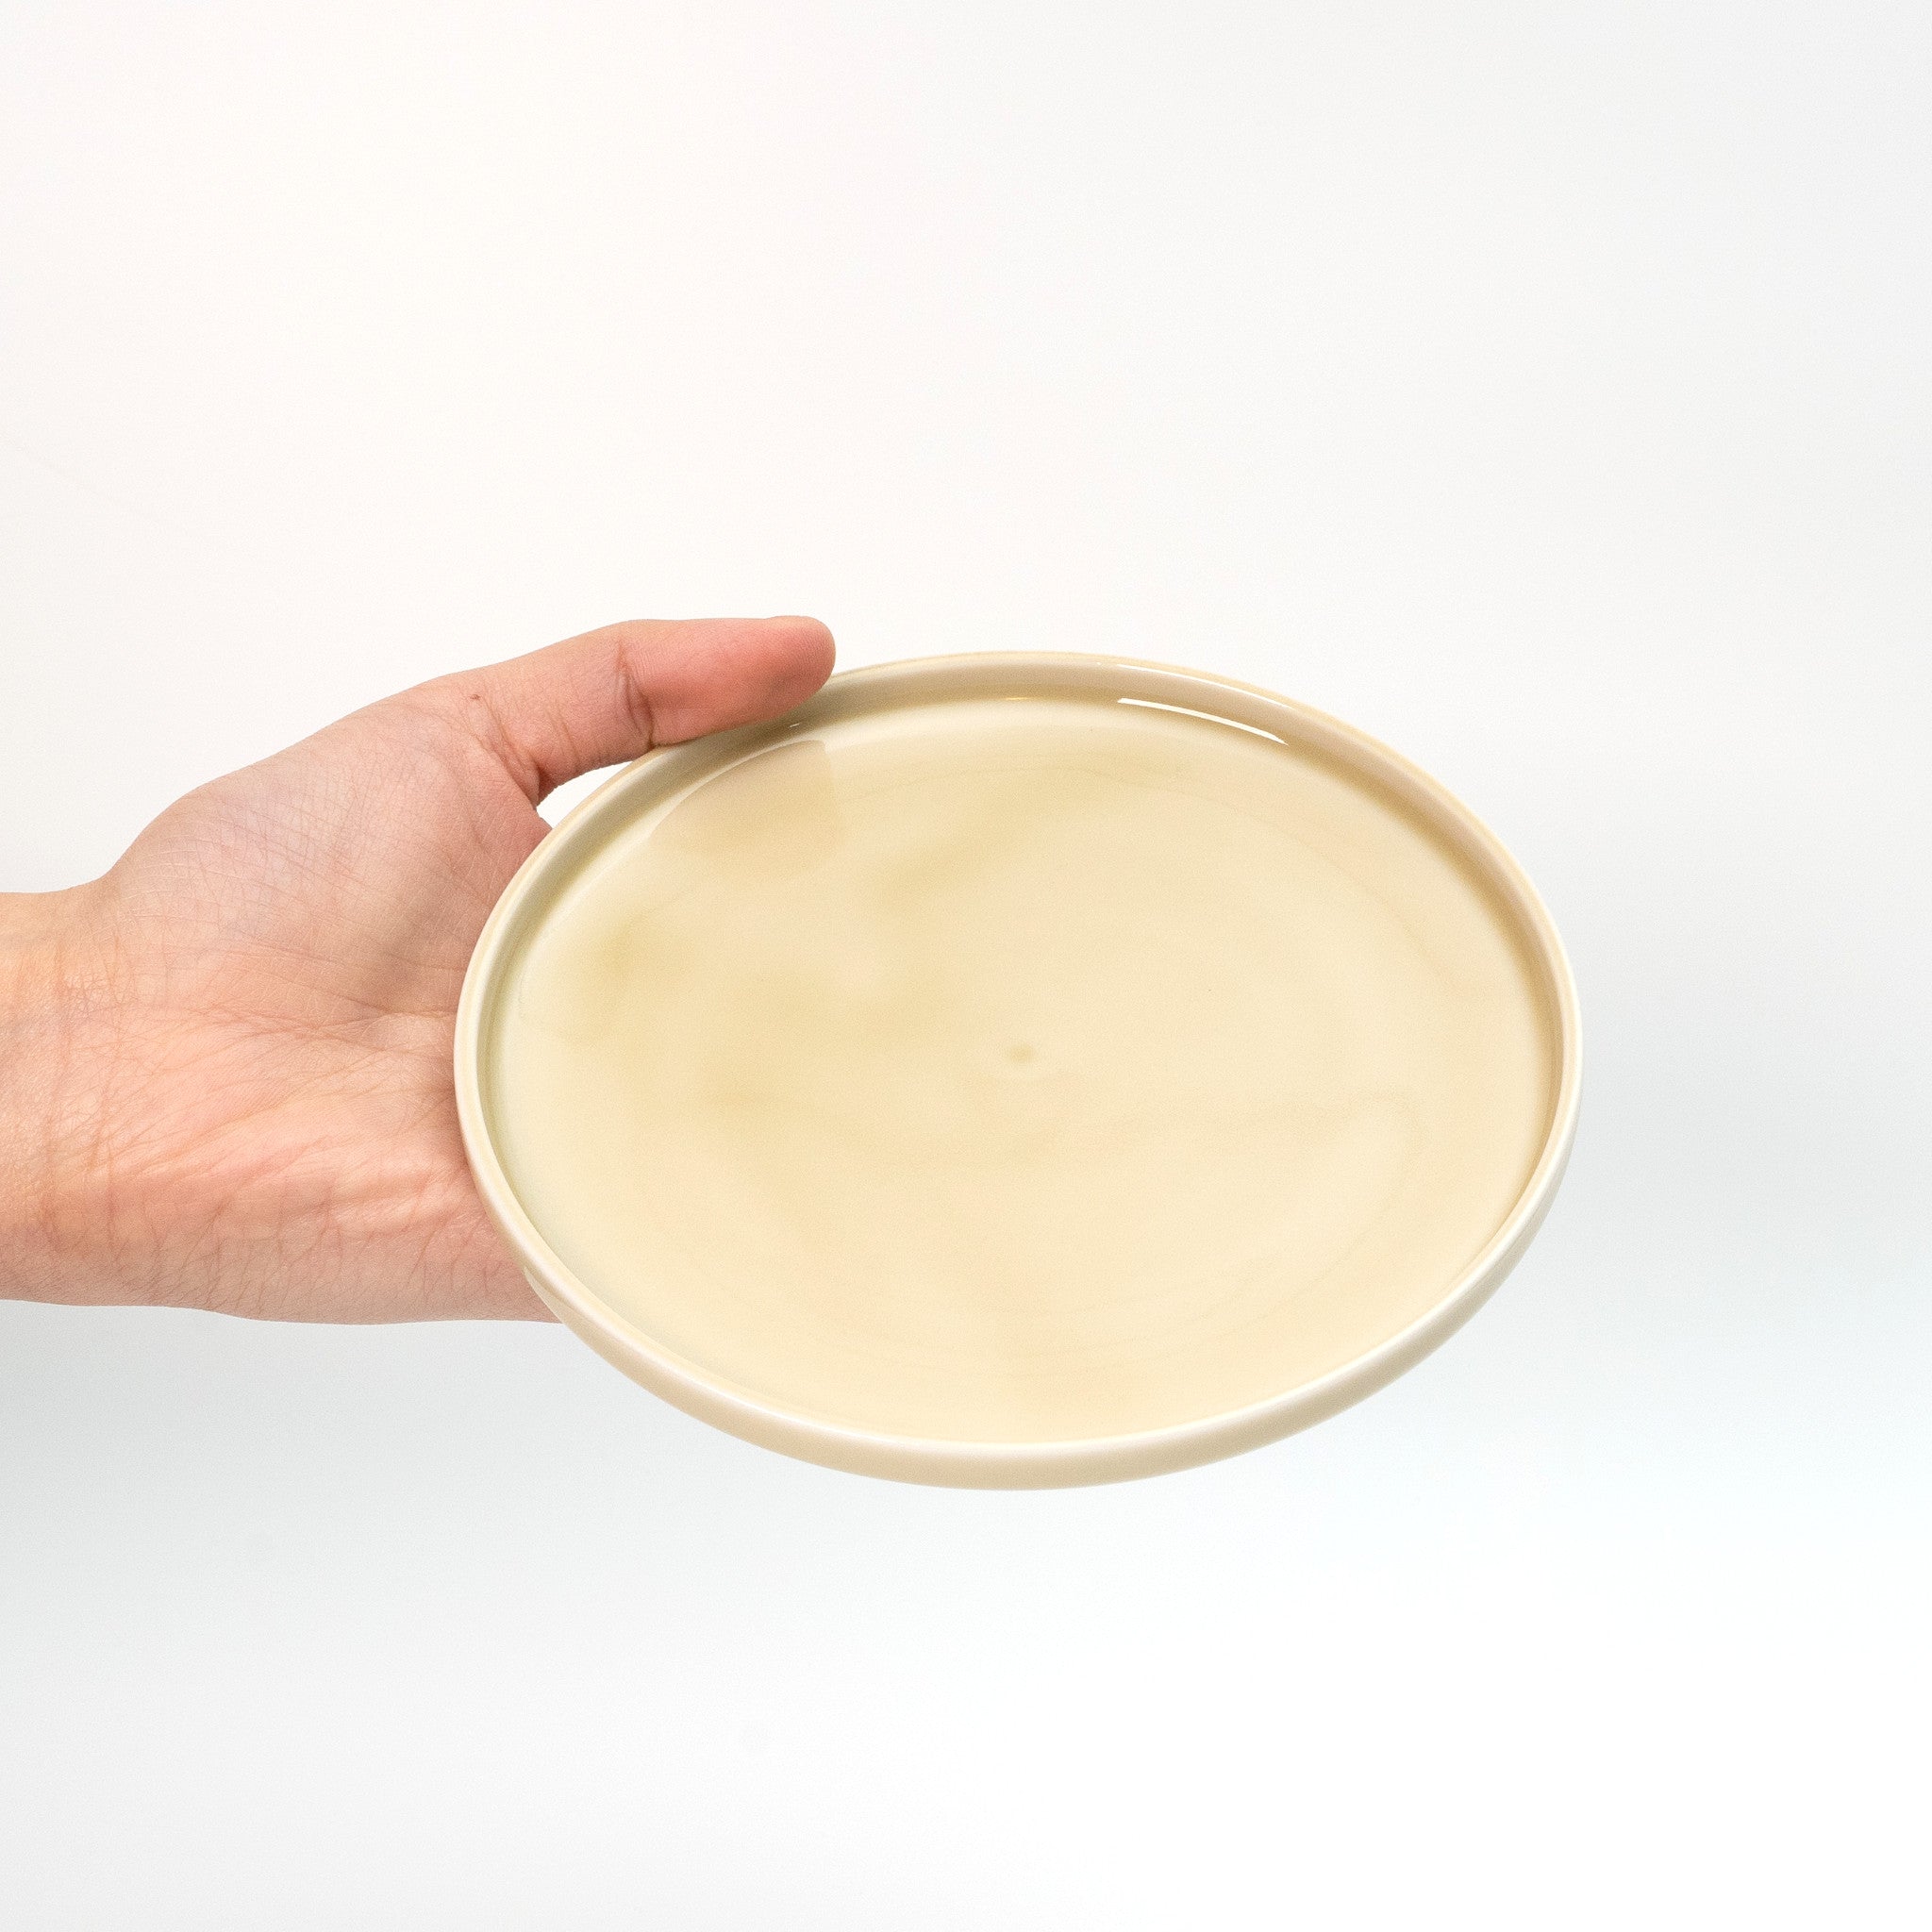 Trip Ware Saucer/Plate - Ivory - 13 cm